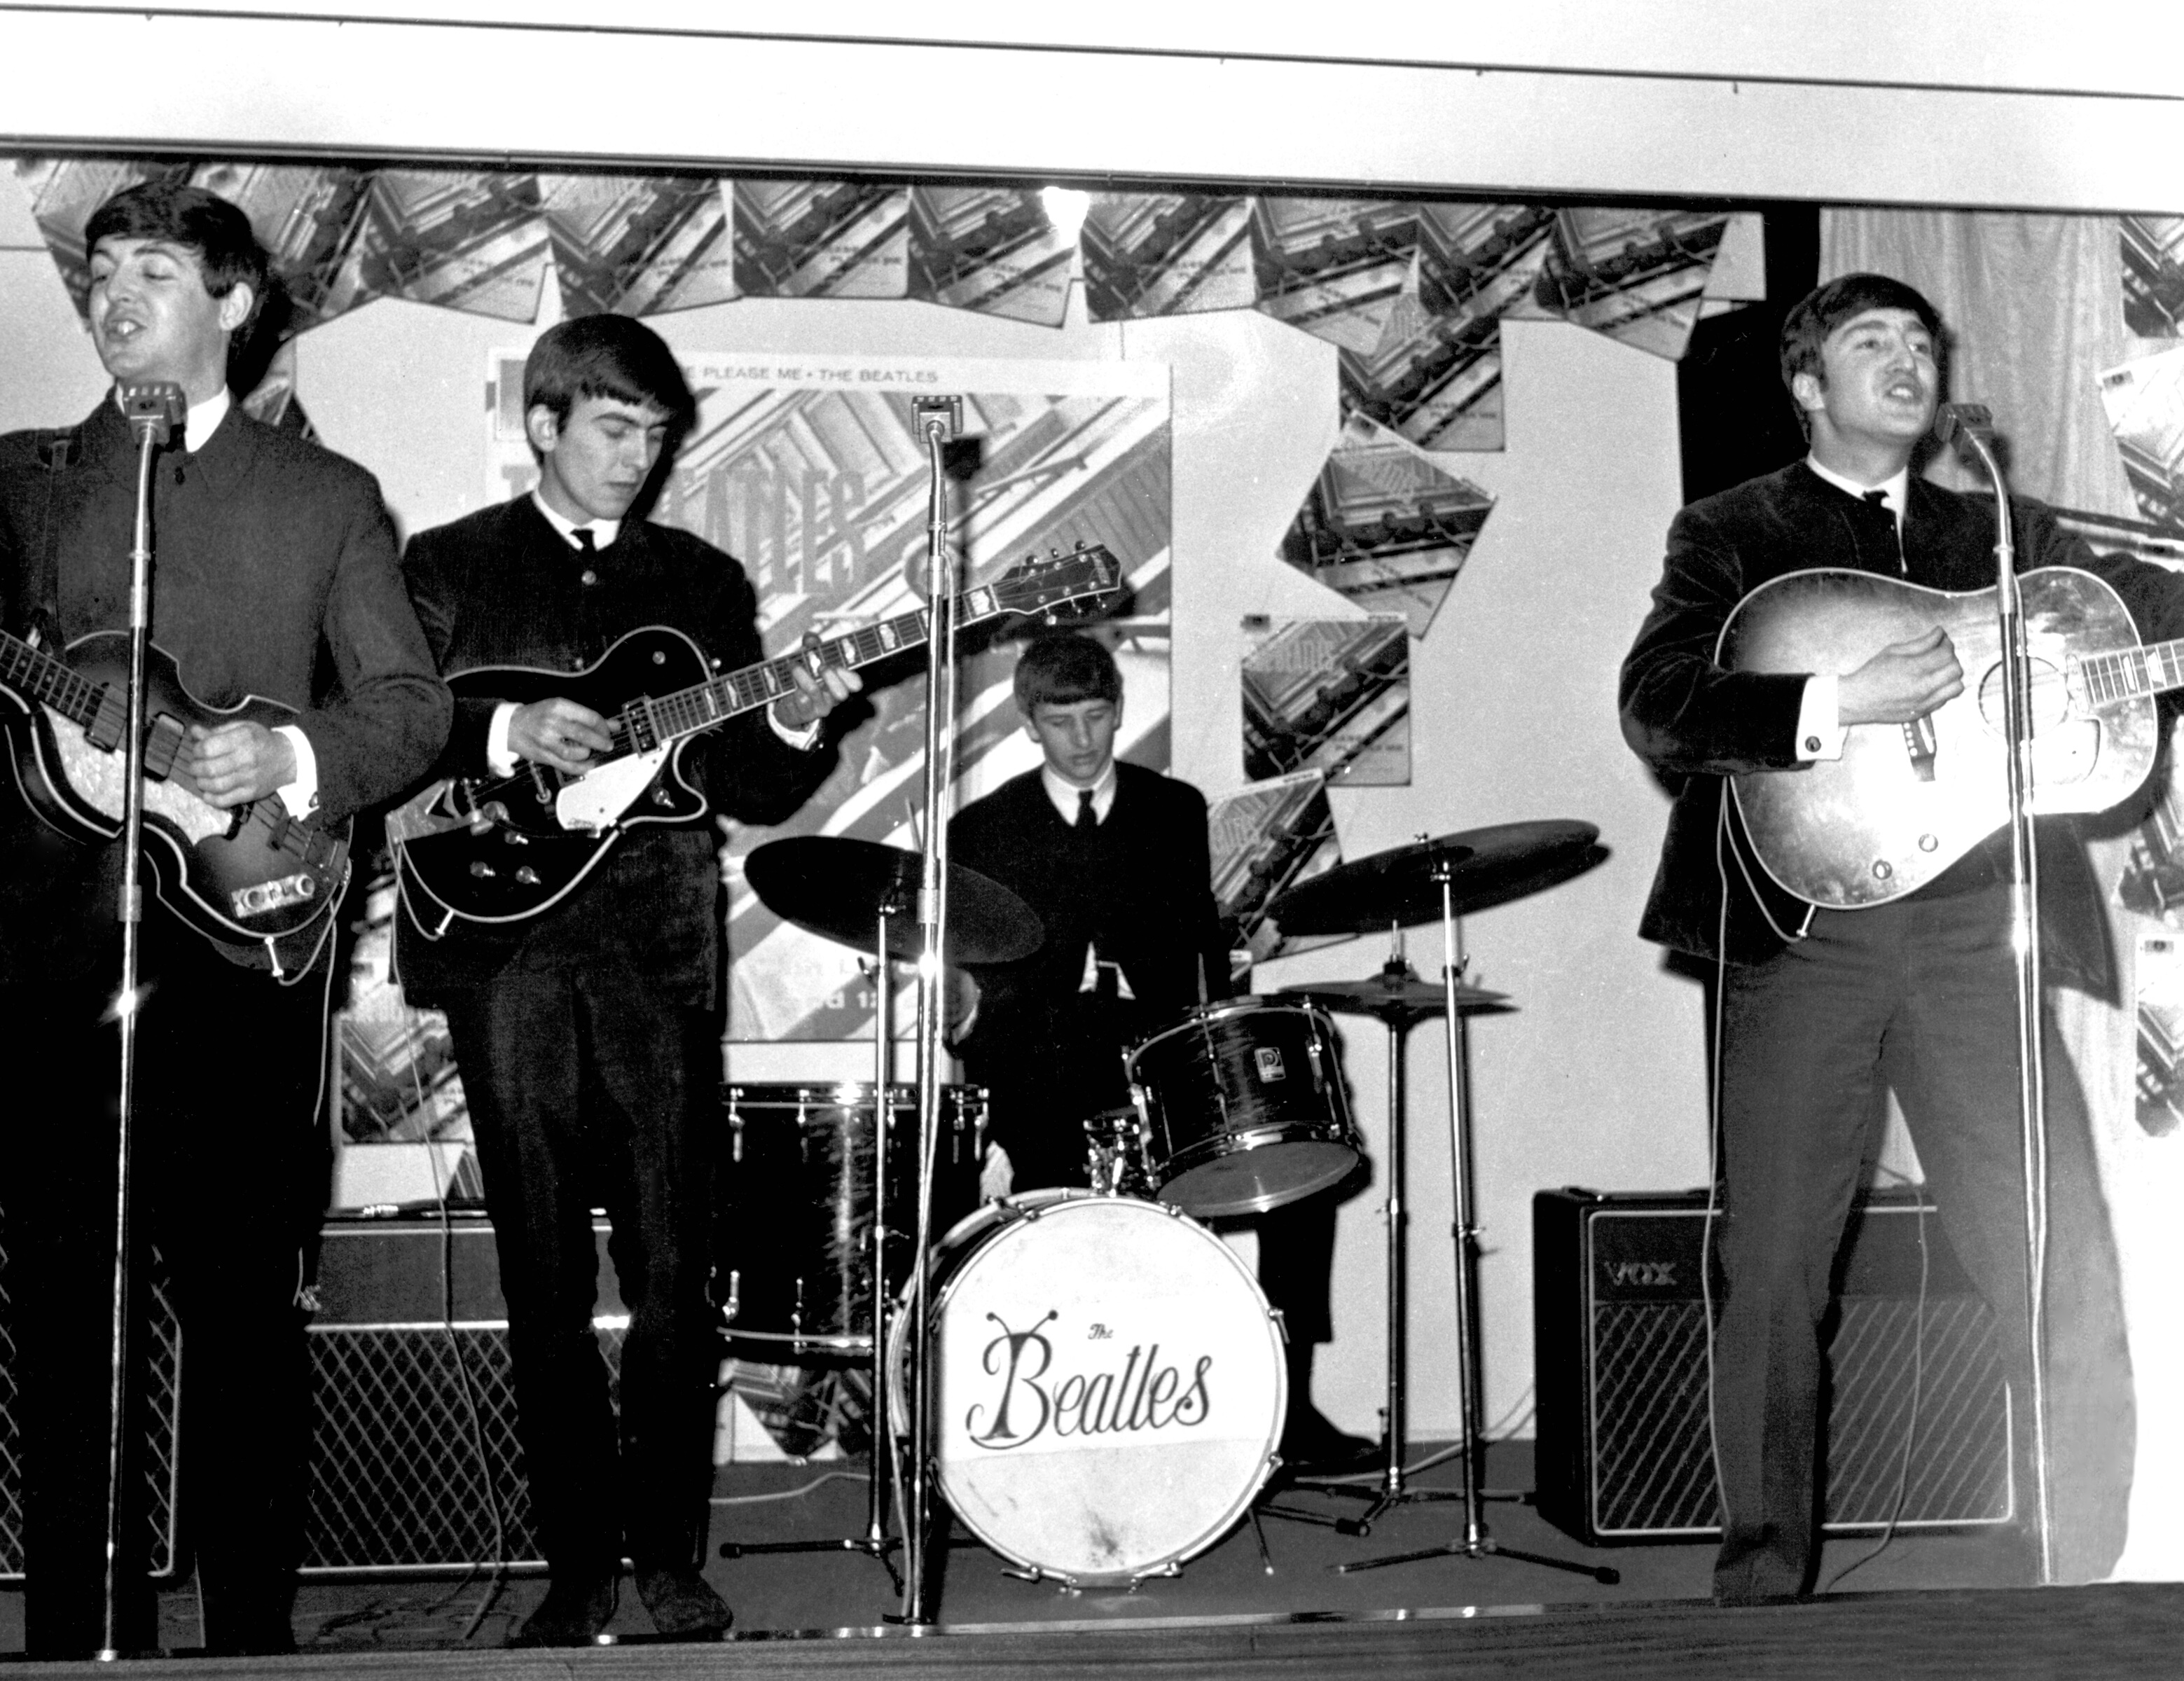 The Beatles in black-and-white during the "From Me to You" era